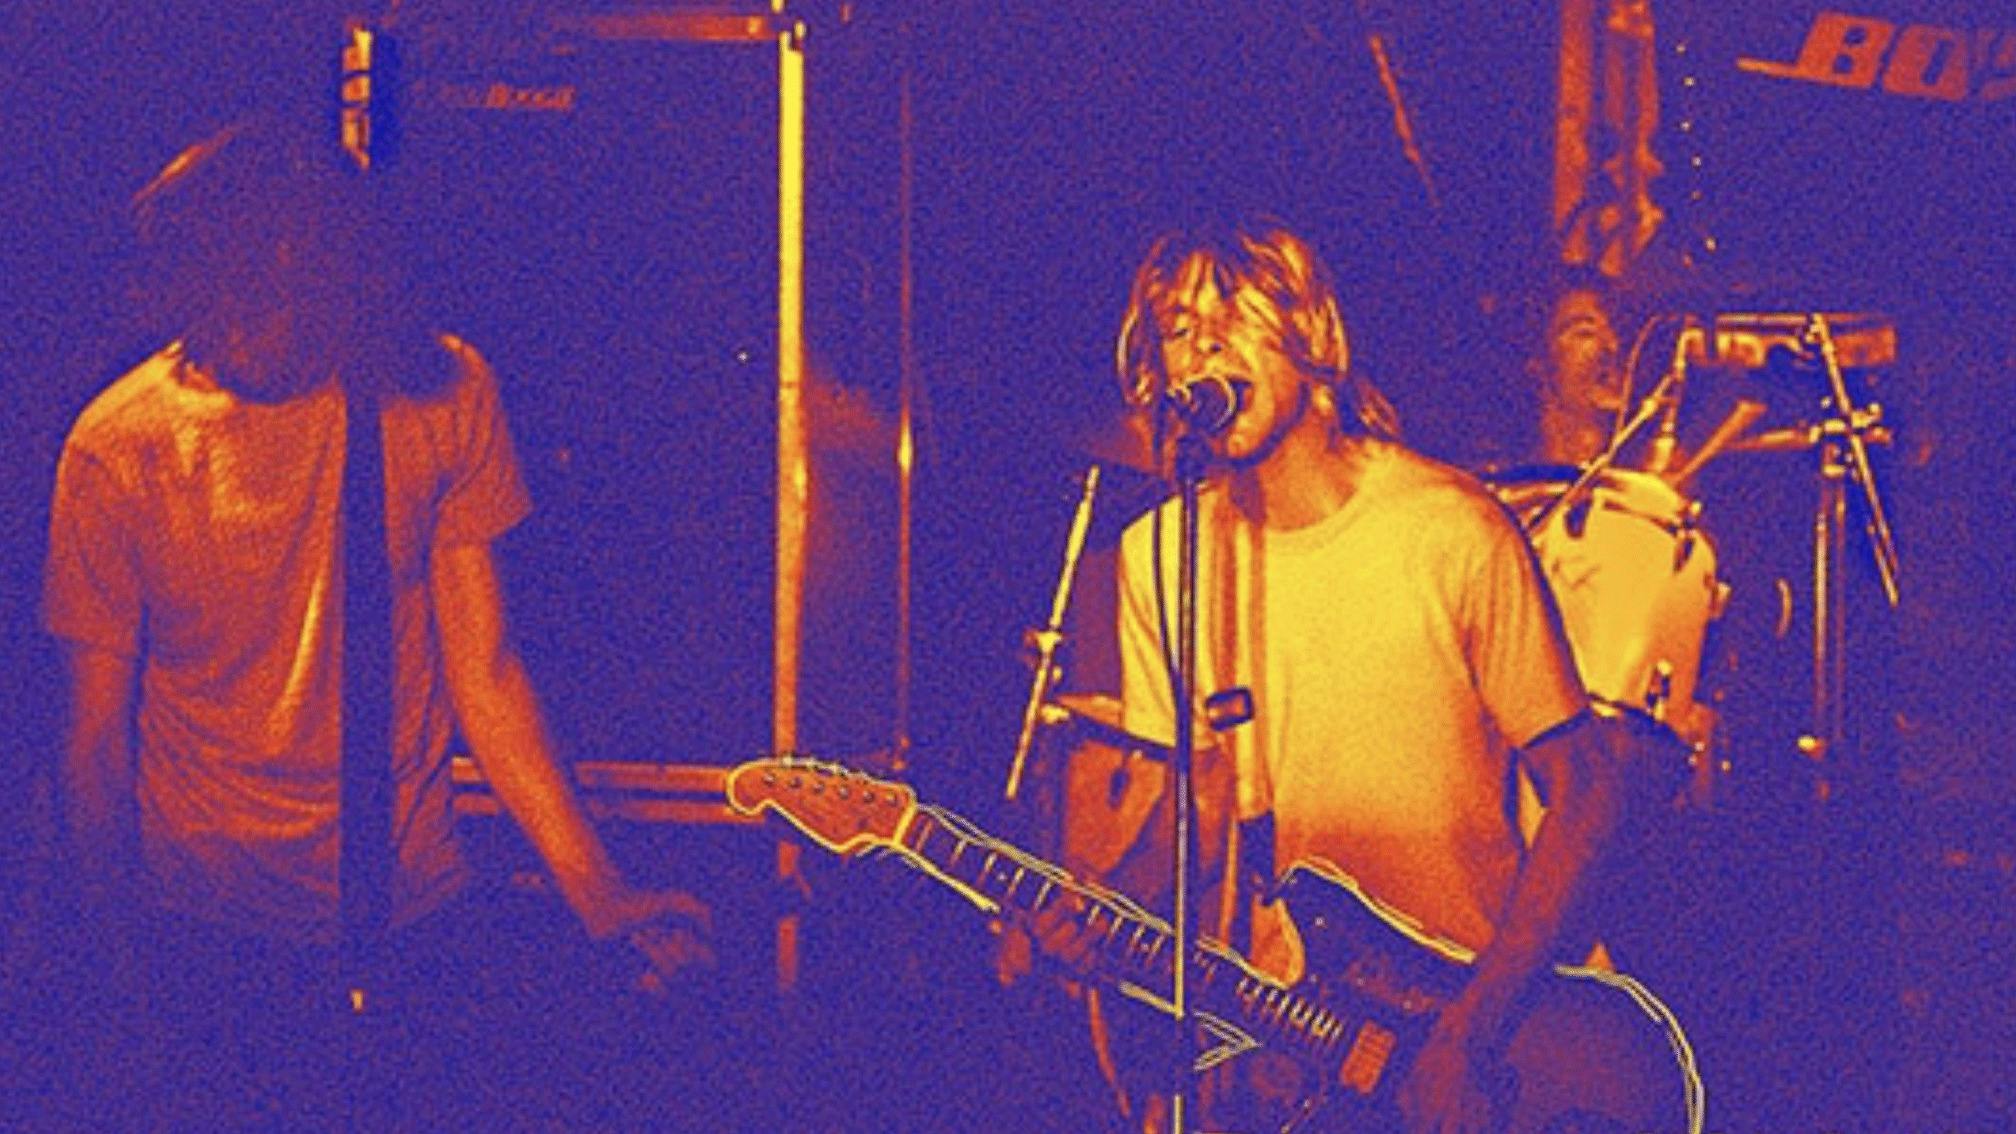 Rare Nirvana images to be sold as NFTs on Kurt Cobain’s 55th birthday